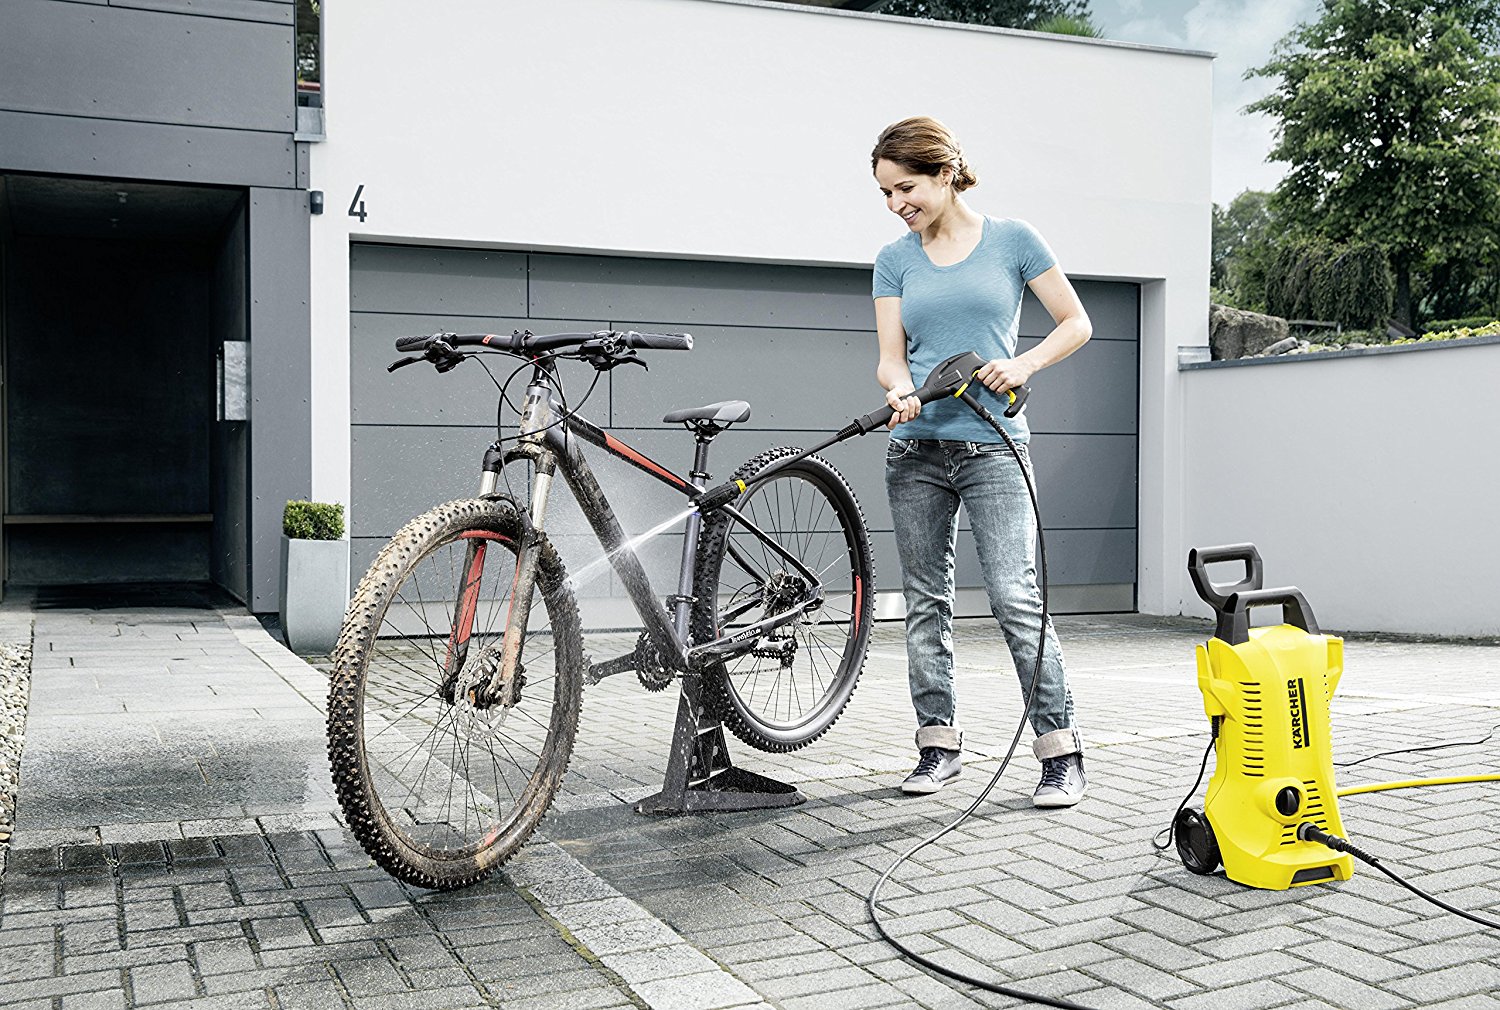 Kärcher K4 vs. Kärcher K2: which pressure washer is right for you?